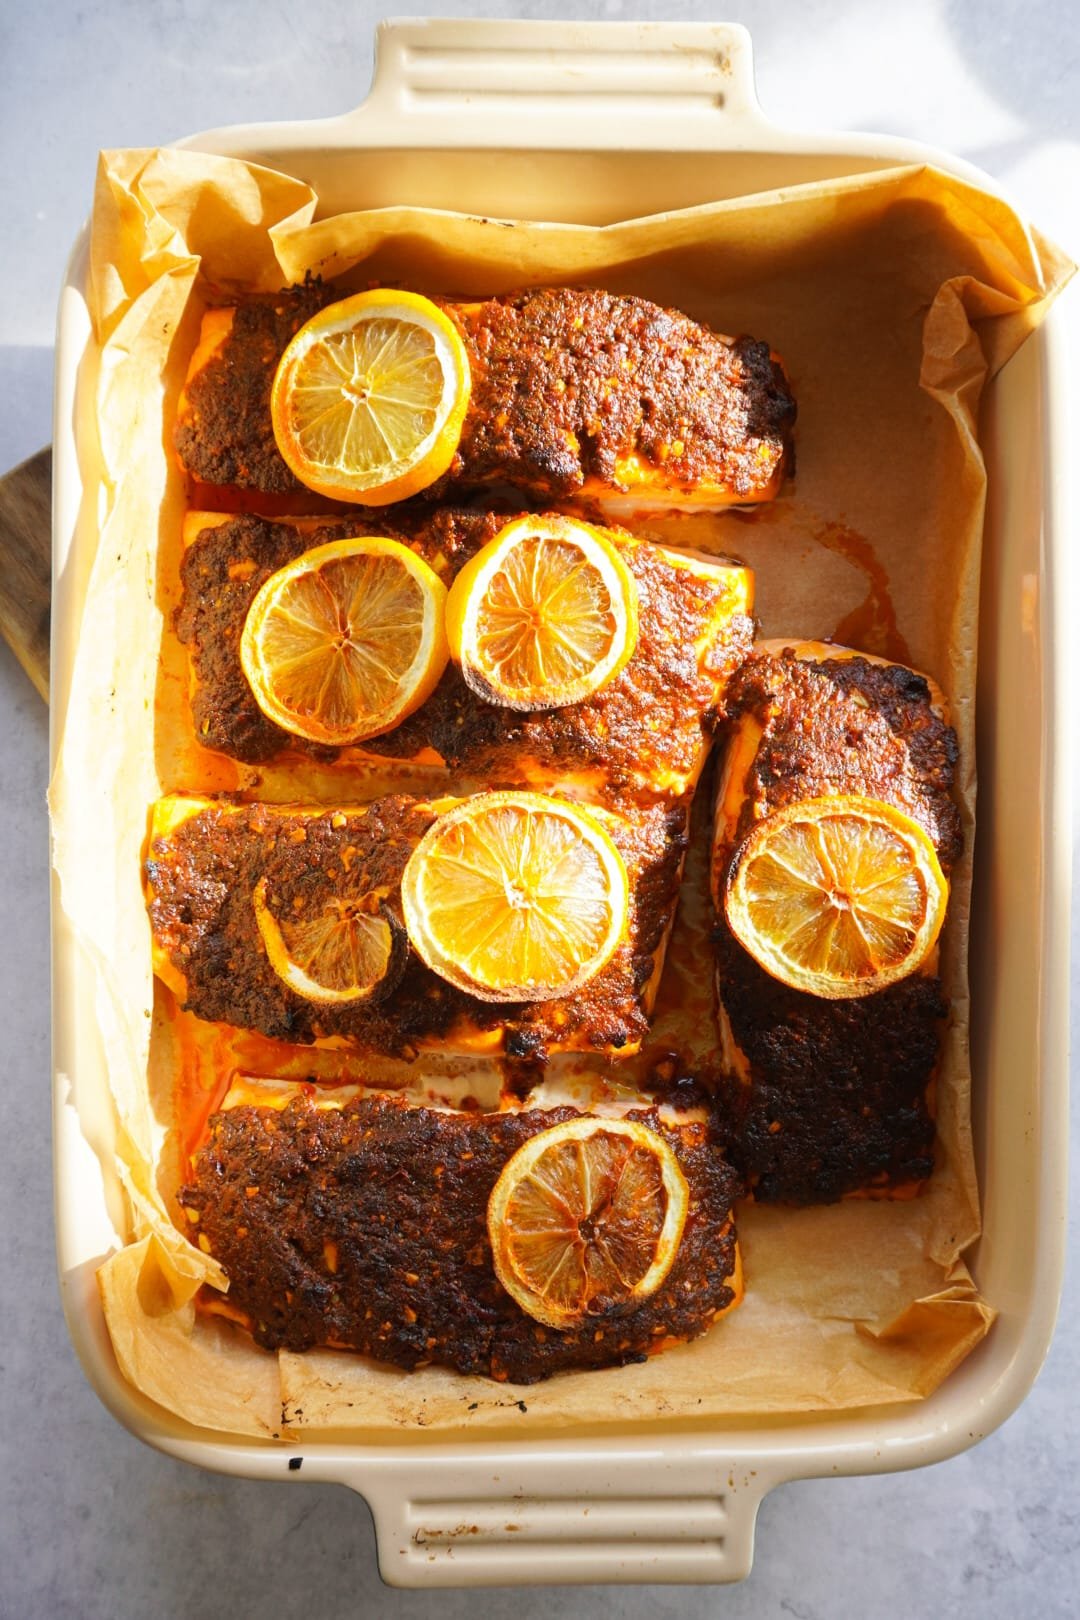 Add sliced lemon on top of the salmon pieces and put the baking tray in a preheated oven to bake for 15 minutes.